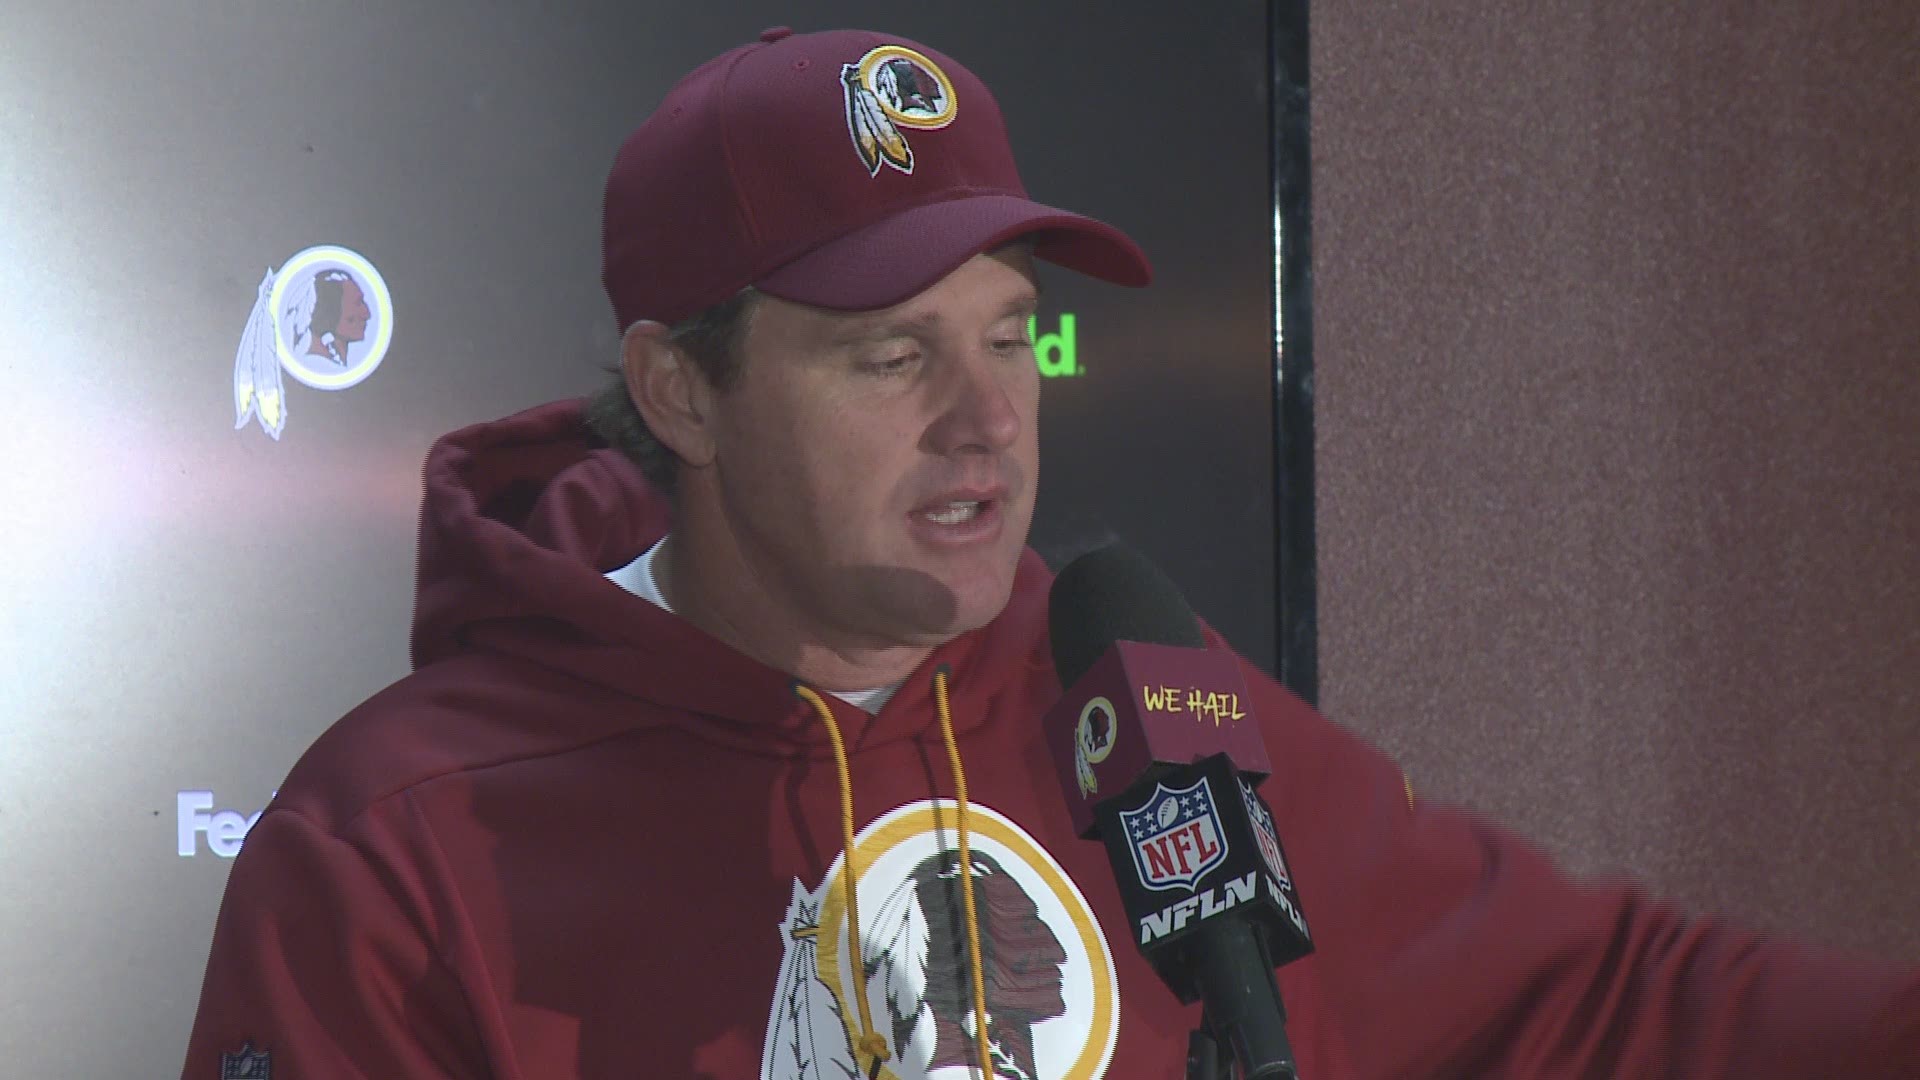 We have a few comments on Alex Smith and his horrendous injury, plus a look at the future with Colt McCoy.